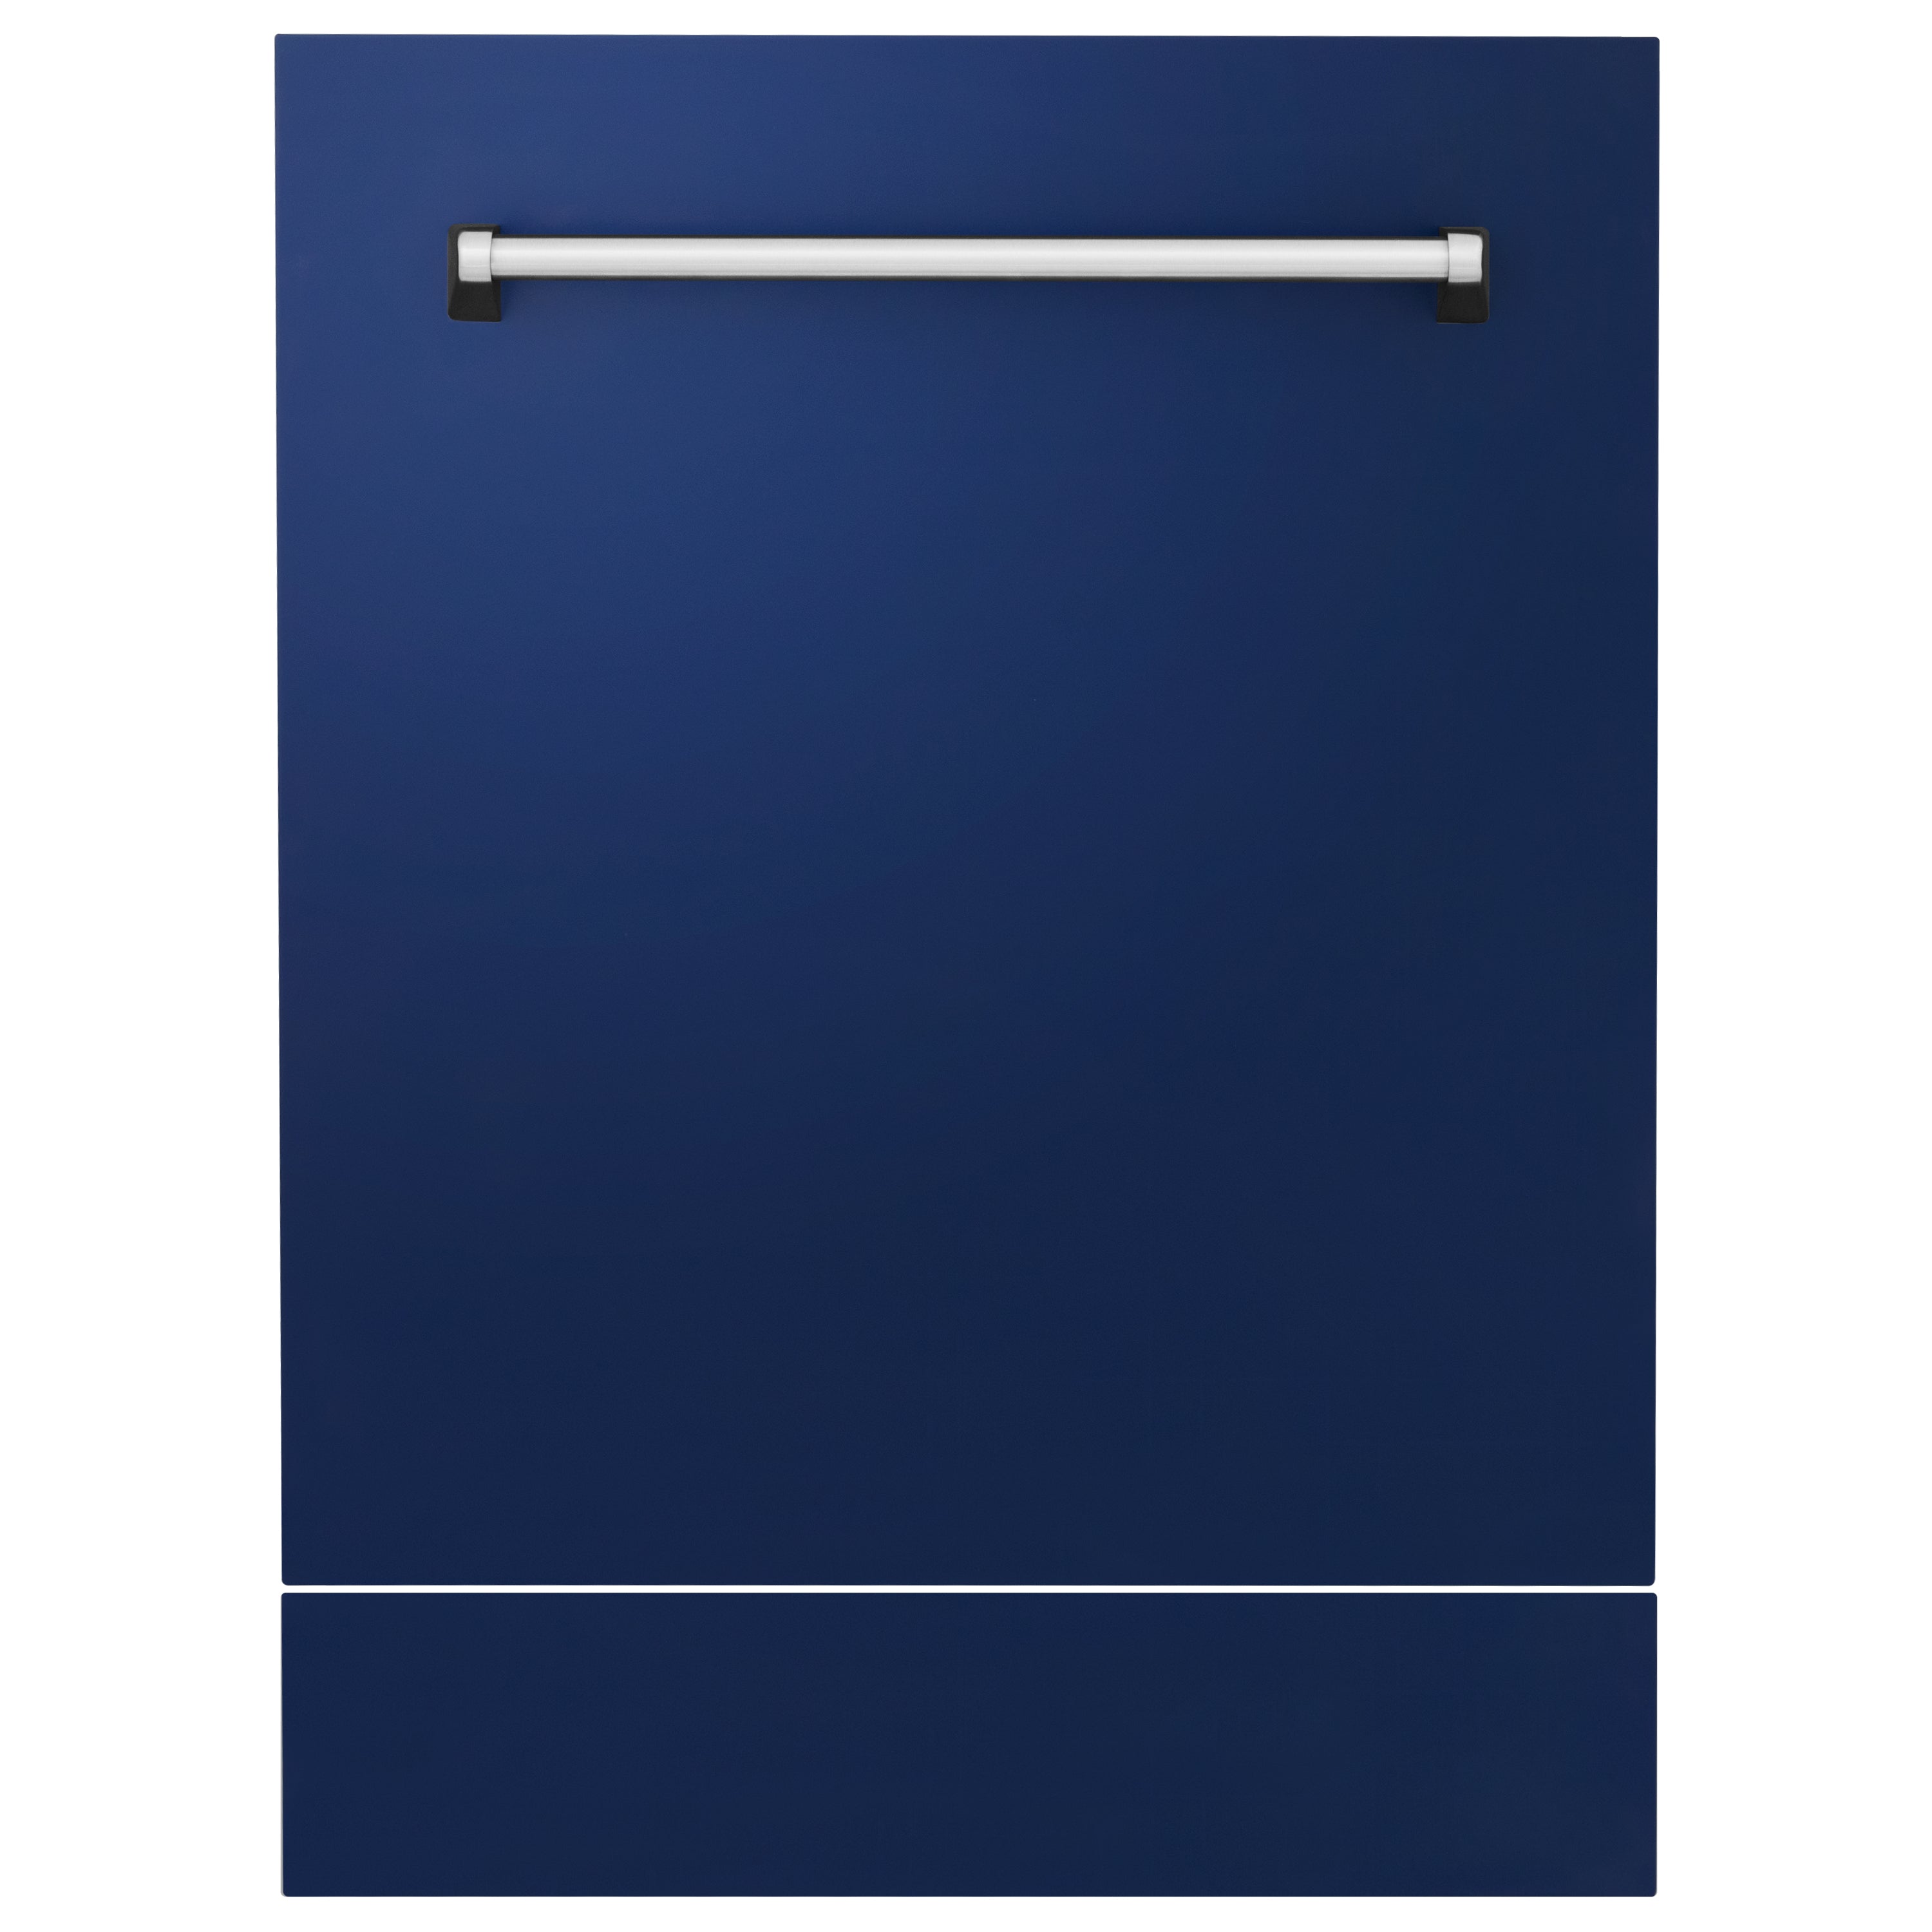 ZLINE 24" Tallac Tall Tub Dishwasher Panel in Blue Gloss with Traditional Handle (DPV-BG-24)